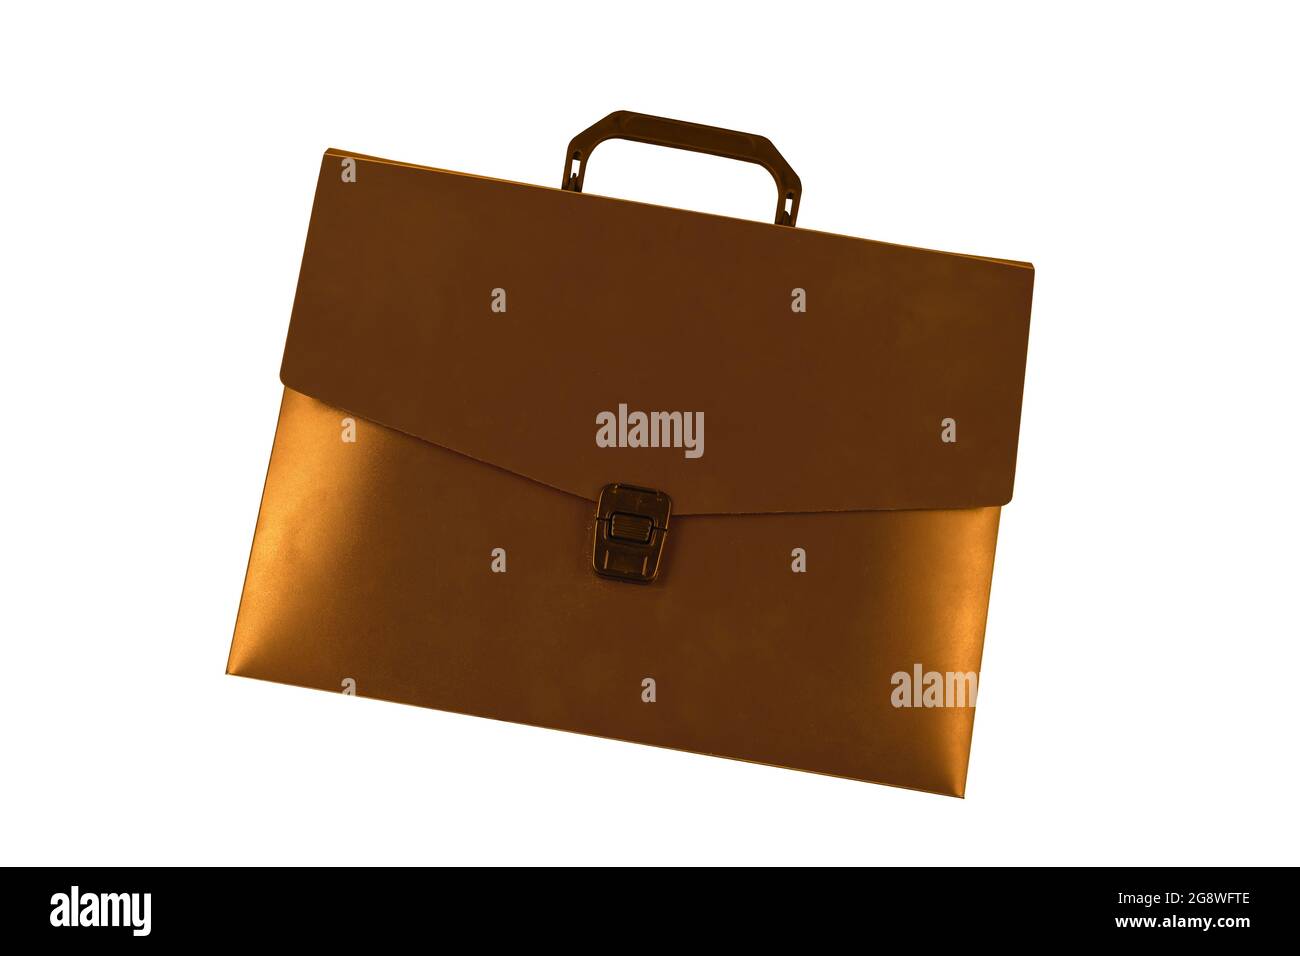 Bronze paper briefcase on a white background. Closed plastic briefcase. Stationery, office accessories. Cut out. Isolated. Stock Photo